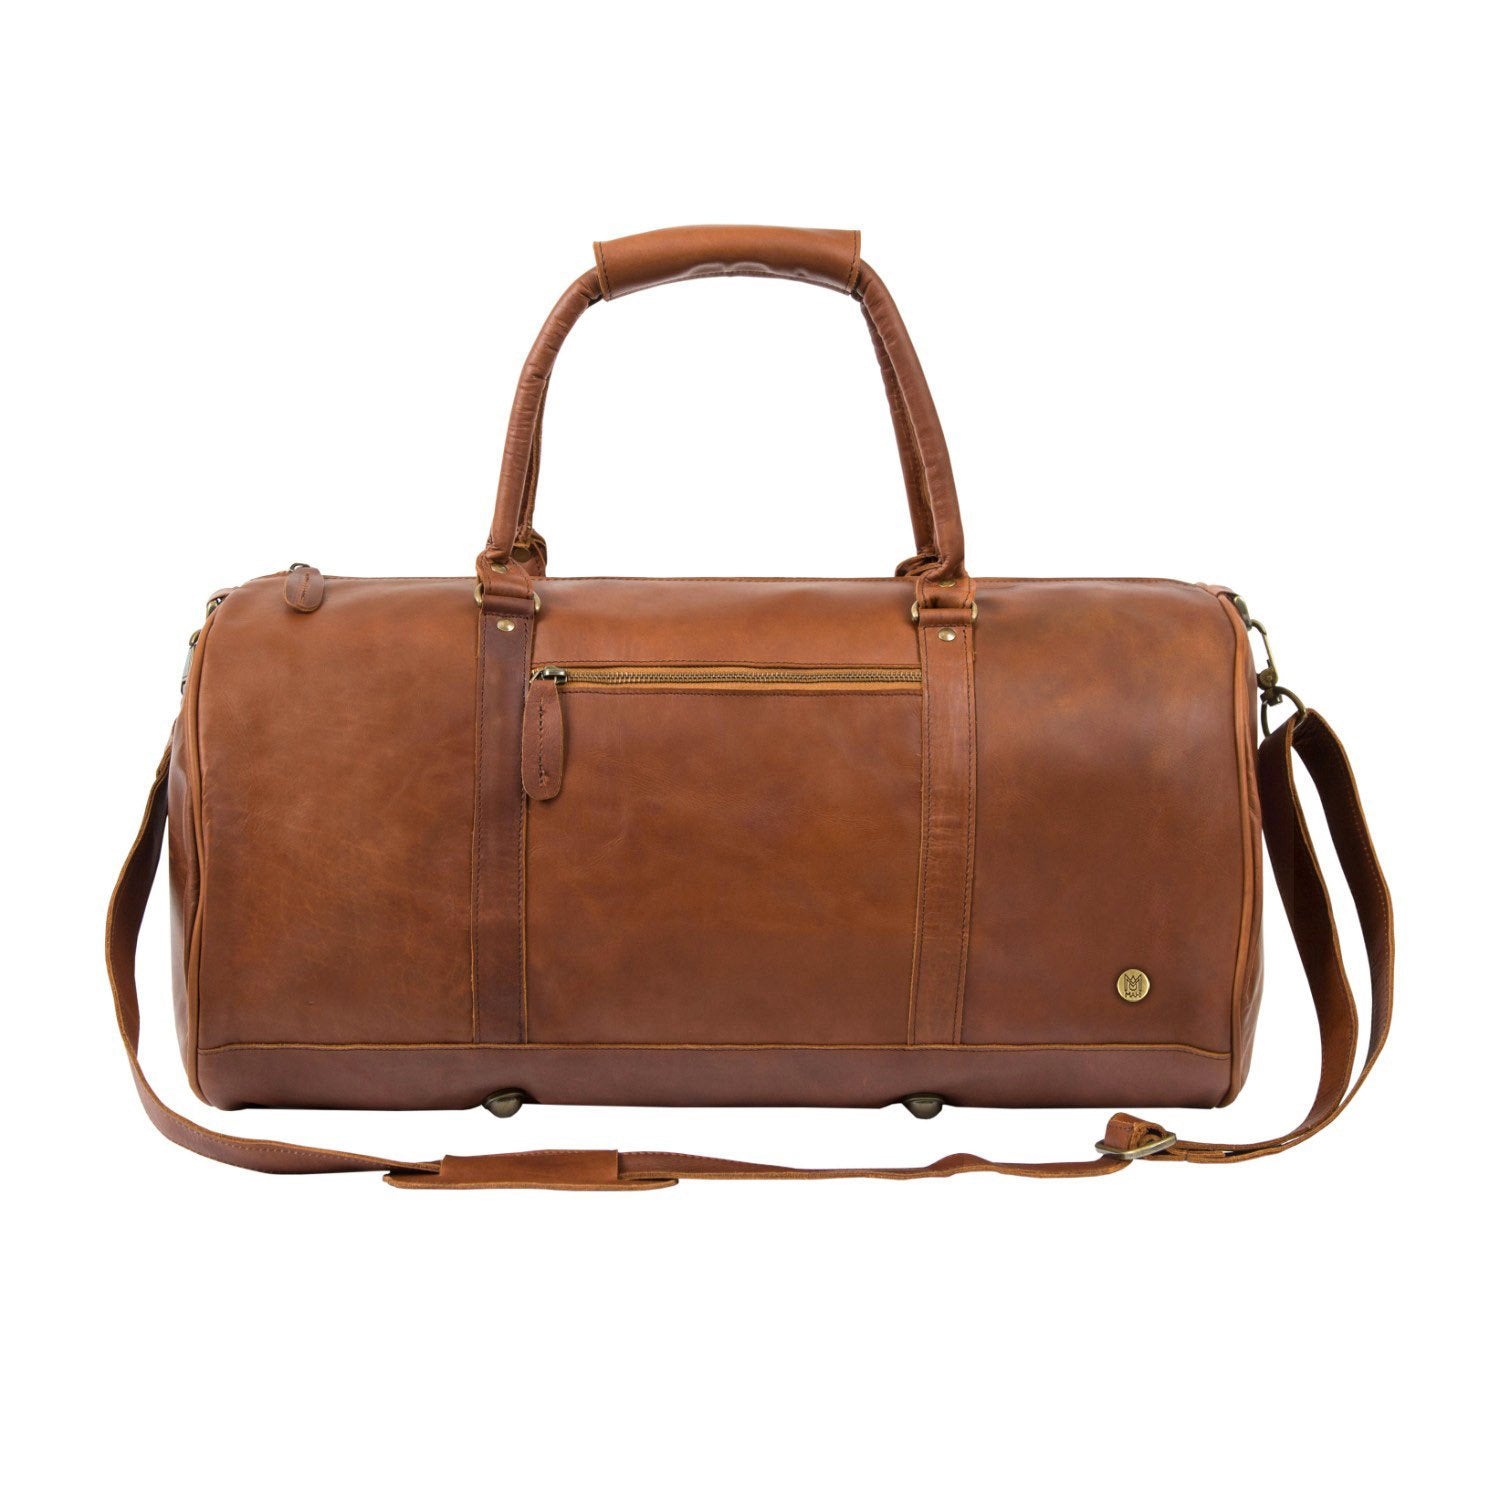 Tips For Easy Air Travel  Mens leather bag, Leather duffel bag